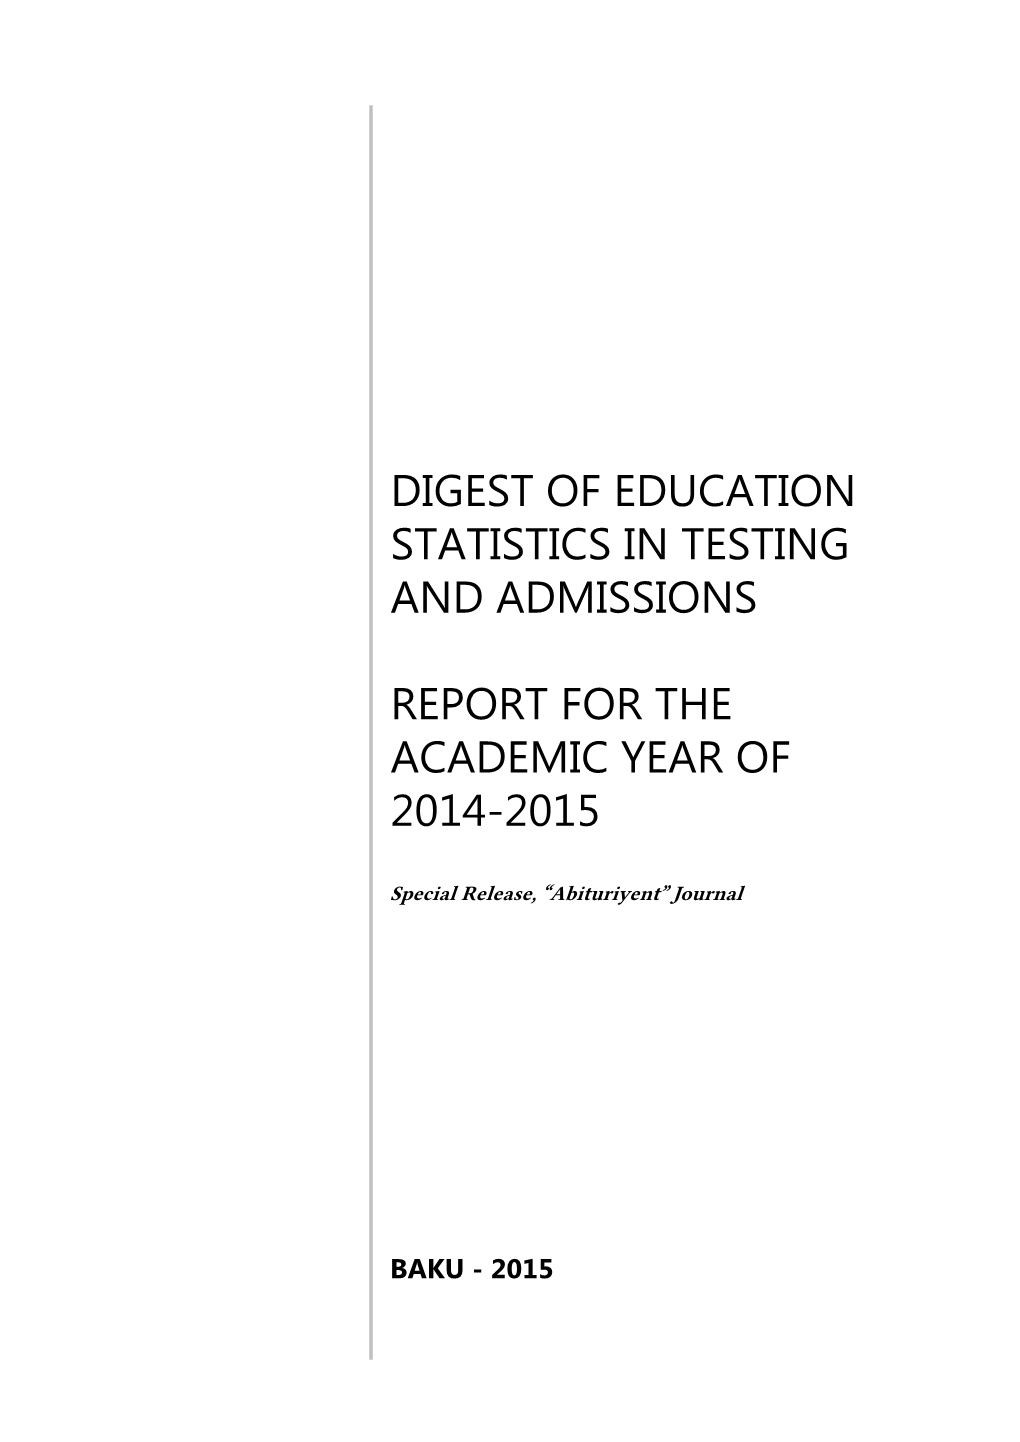 Digest of Education Statistics in Testing and Admissions Report for The